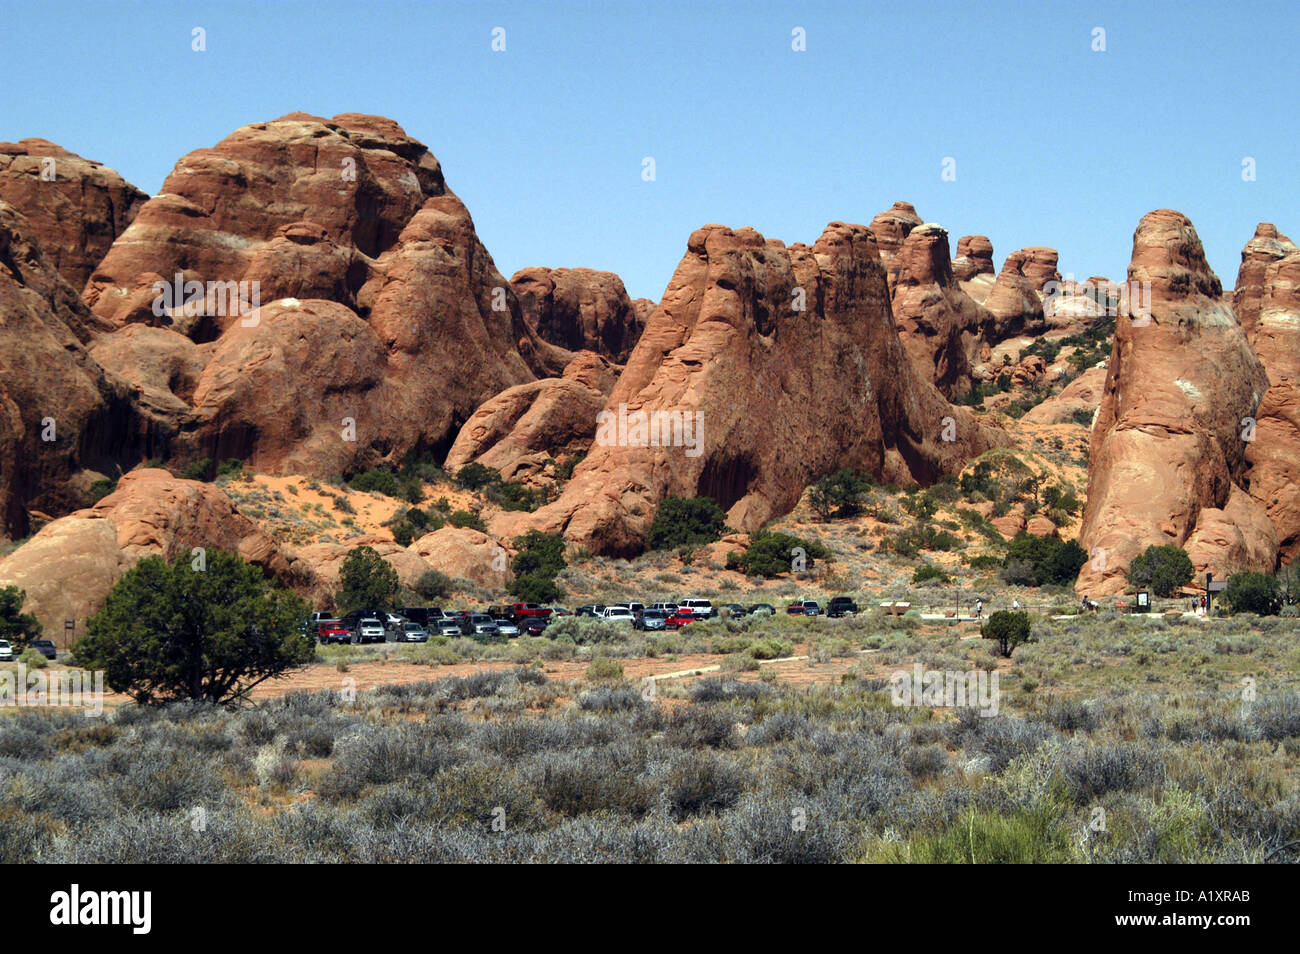 Vehicles parked at Arches National Monument. Moab, Utah, USA. Stock Photo